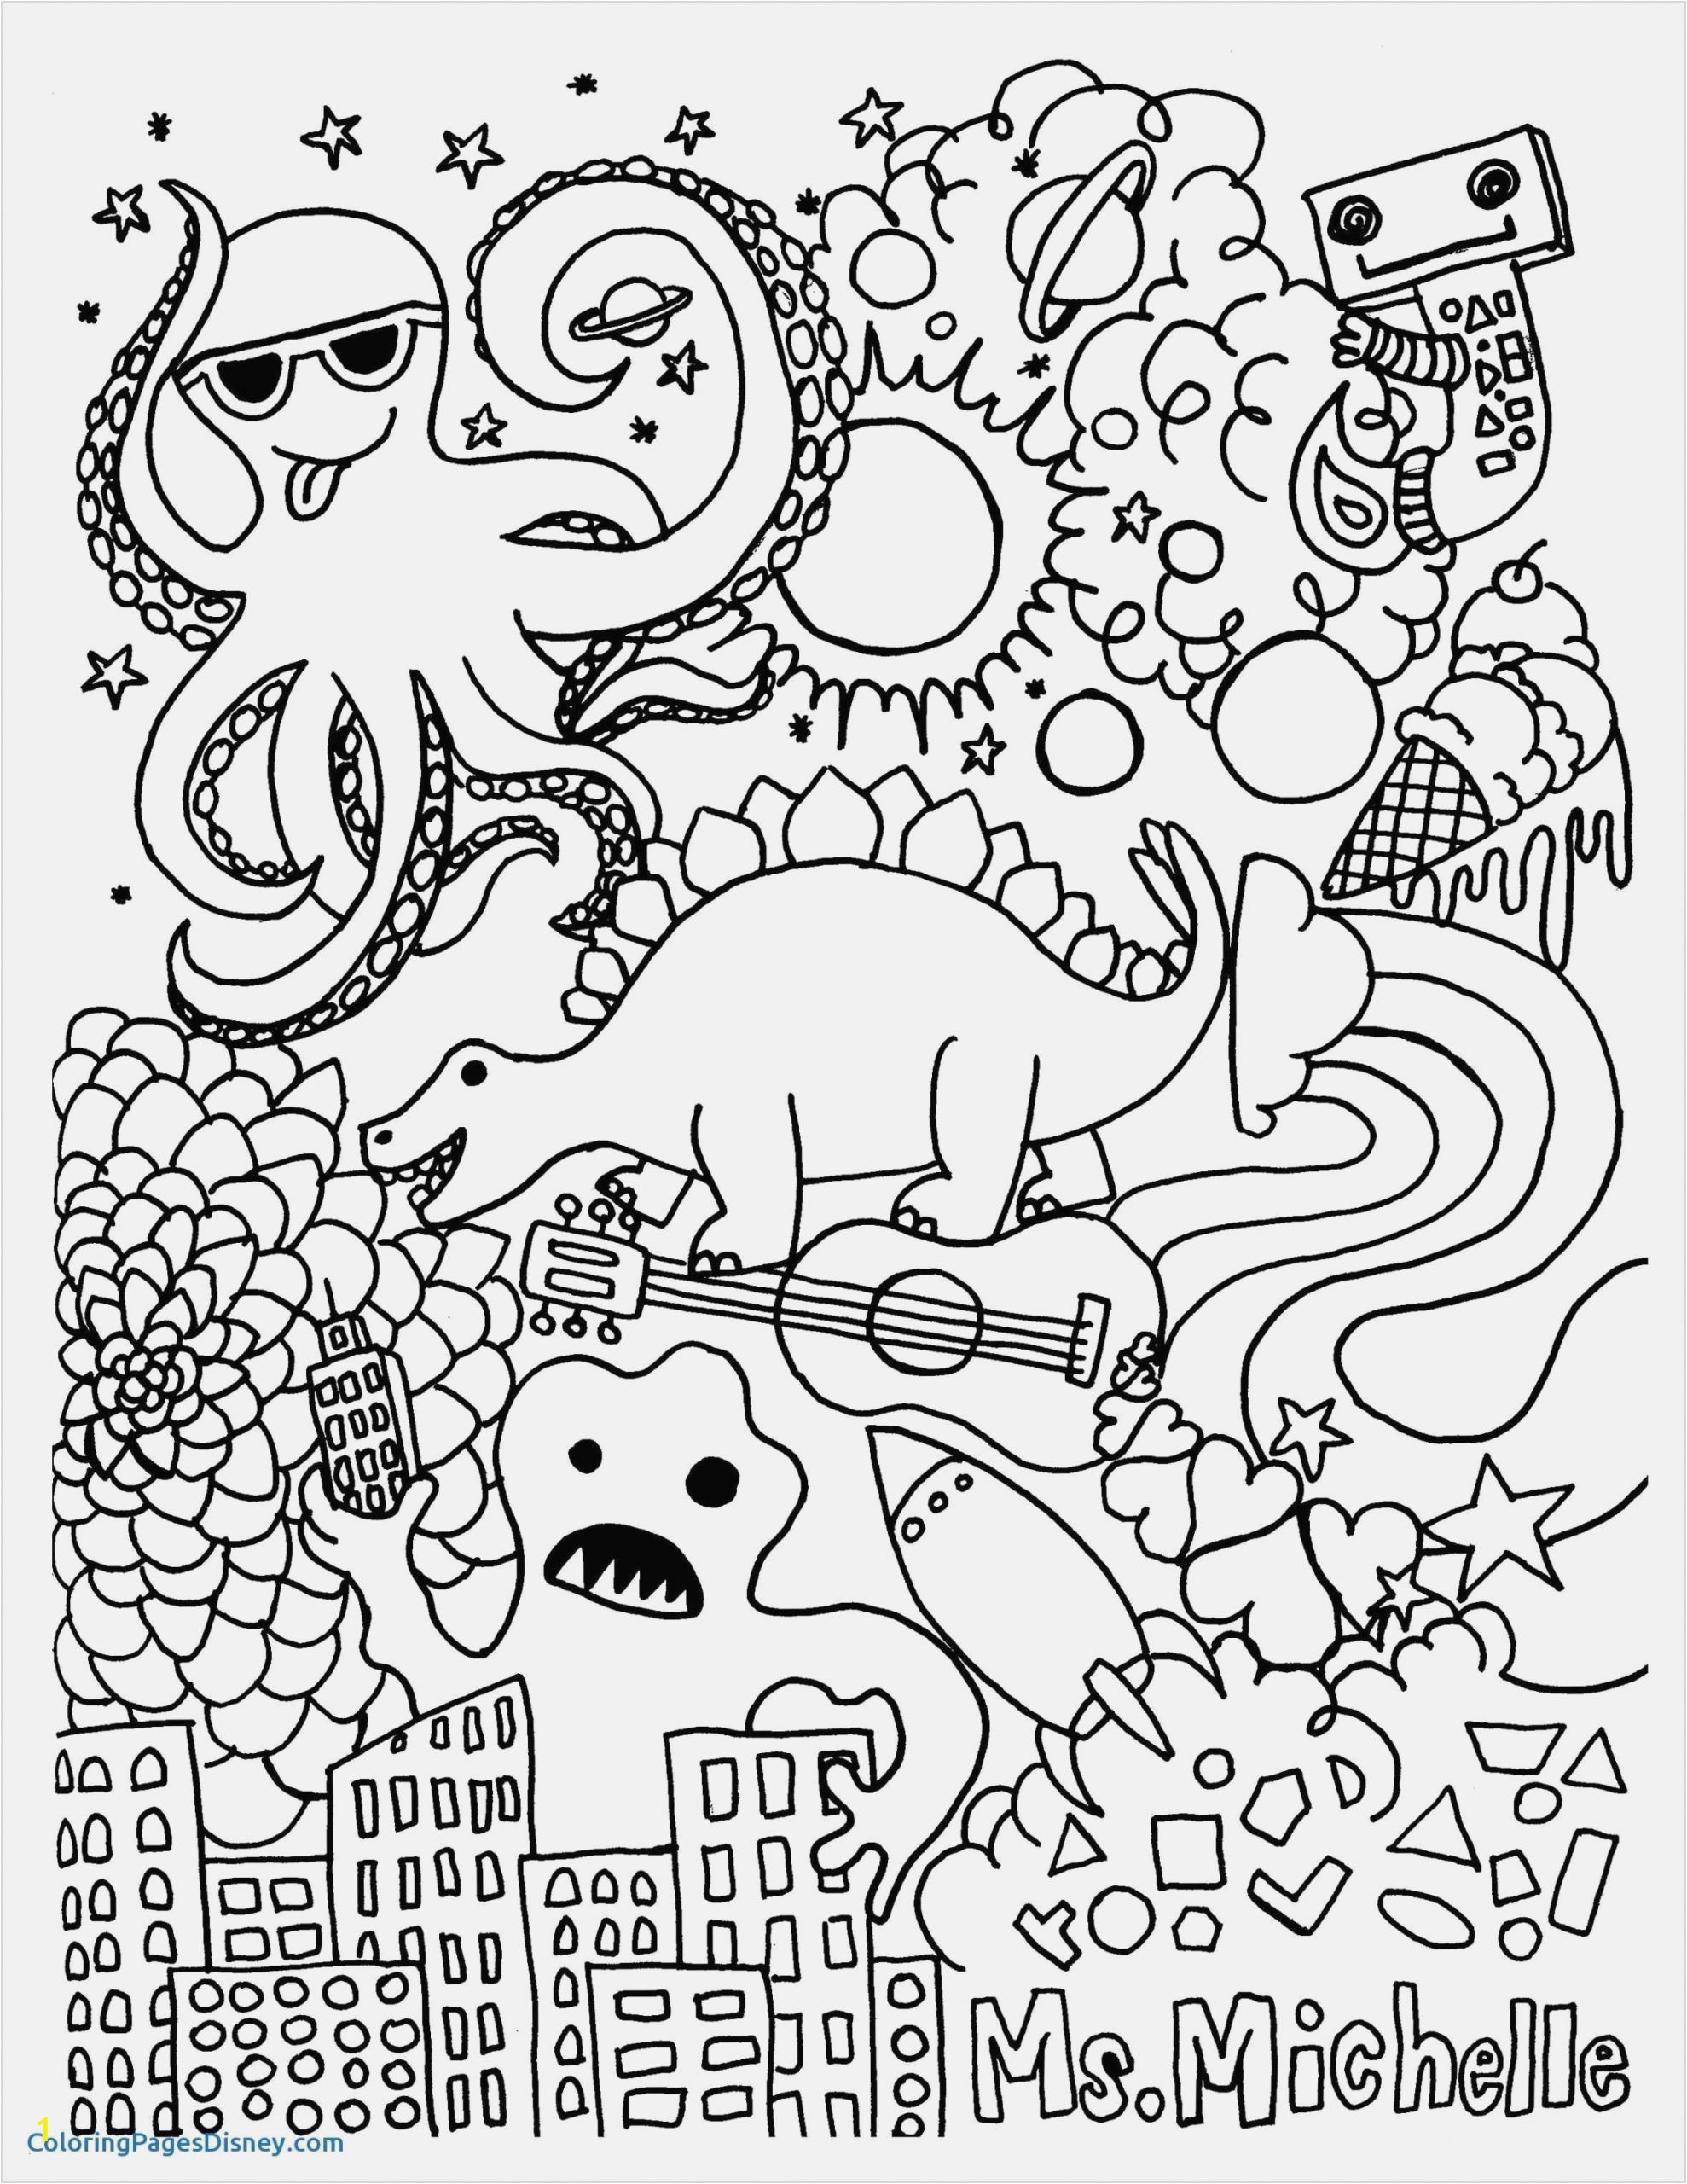 Print Off Coloring Pages for Adults Merry Christmas Printable Coloring Pages at Coloring Pages